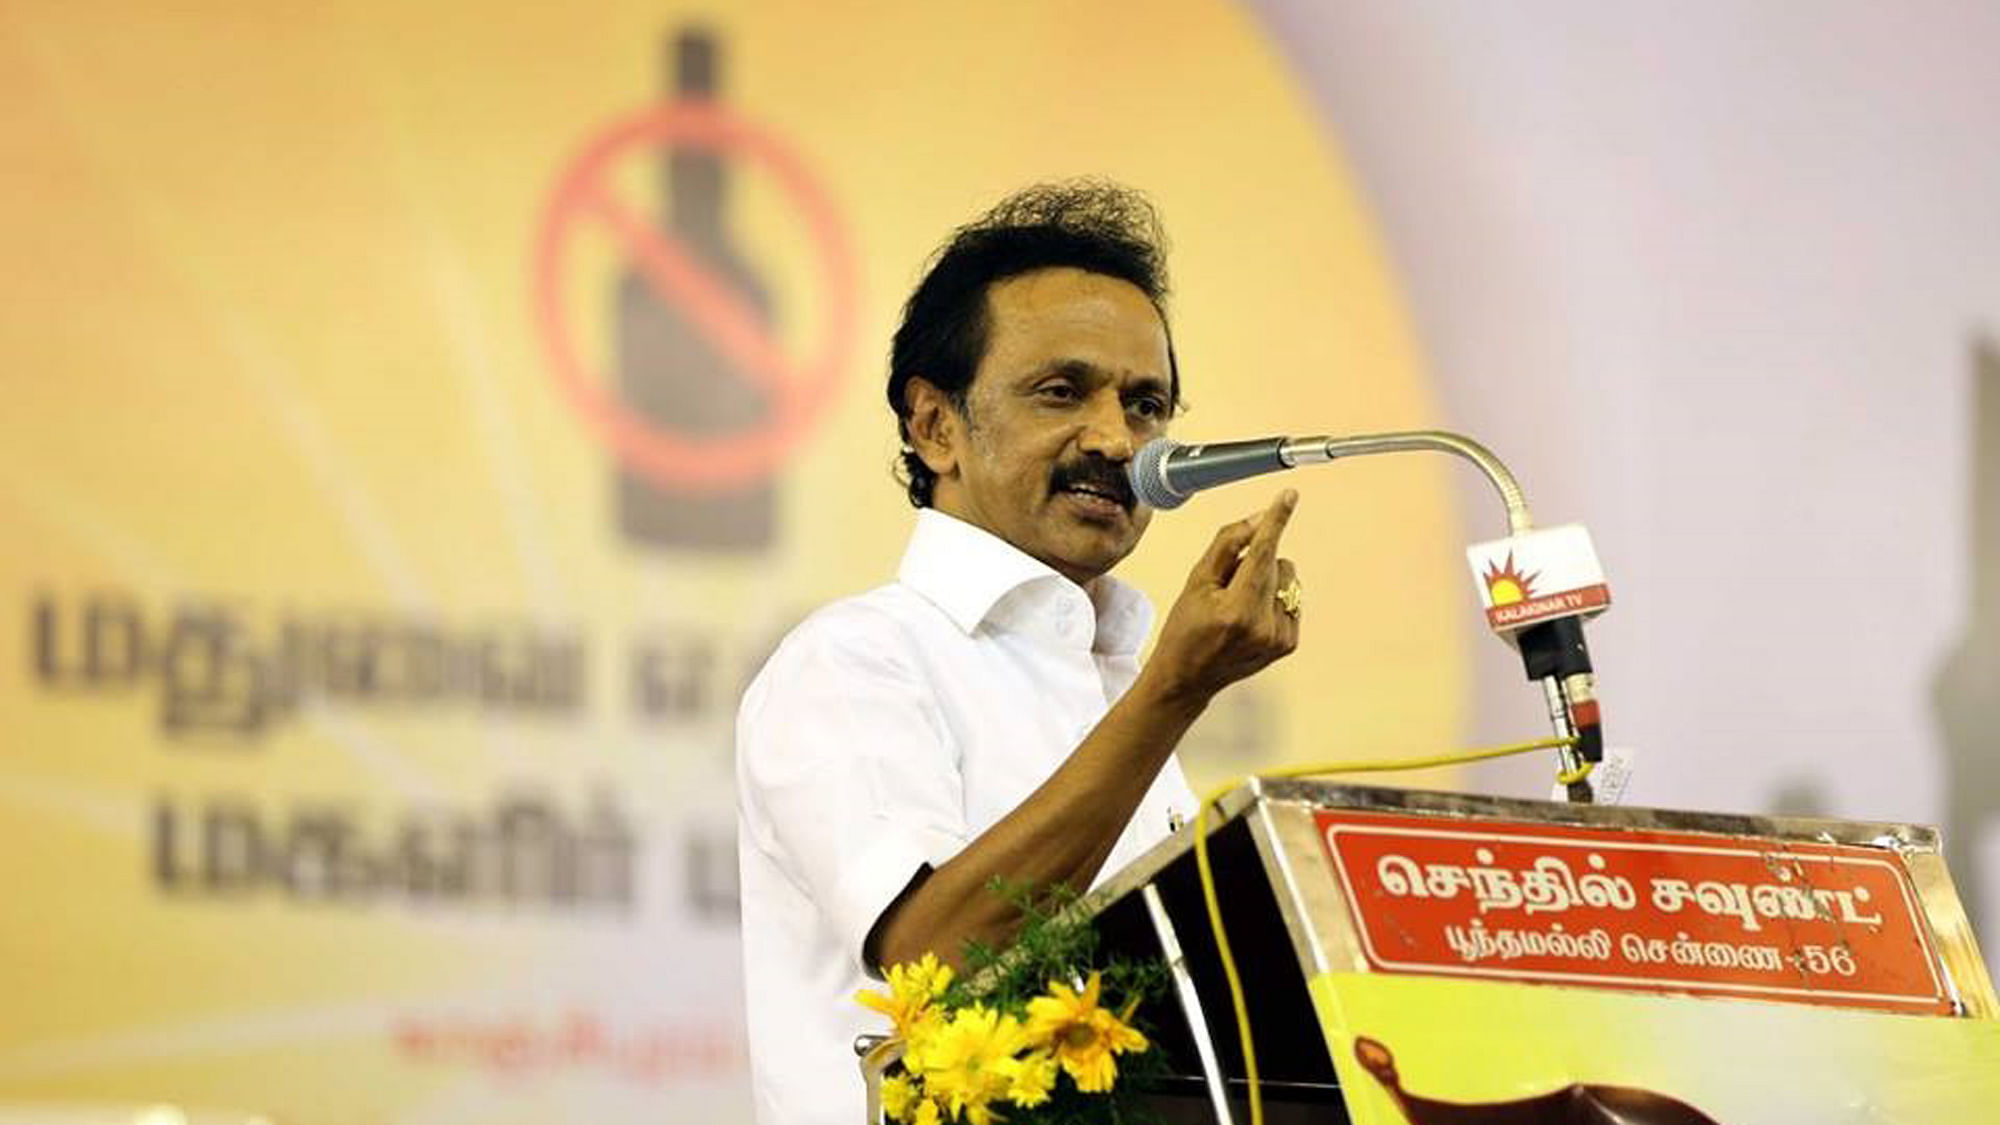 DMK leader MK Stalin participated in the protests. (Photo Courtesy: The News Minute)